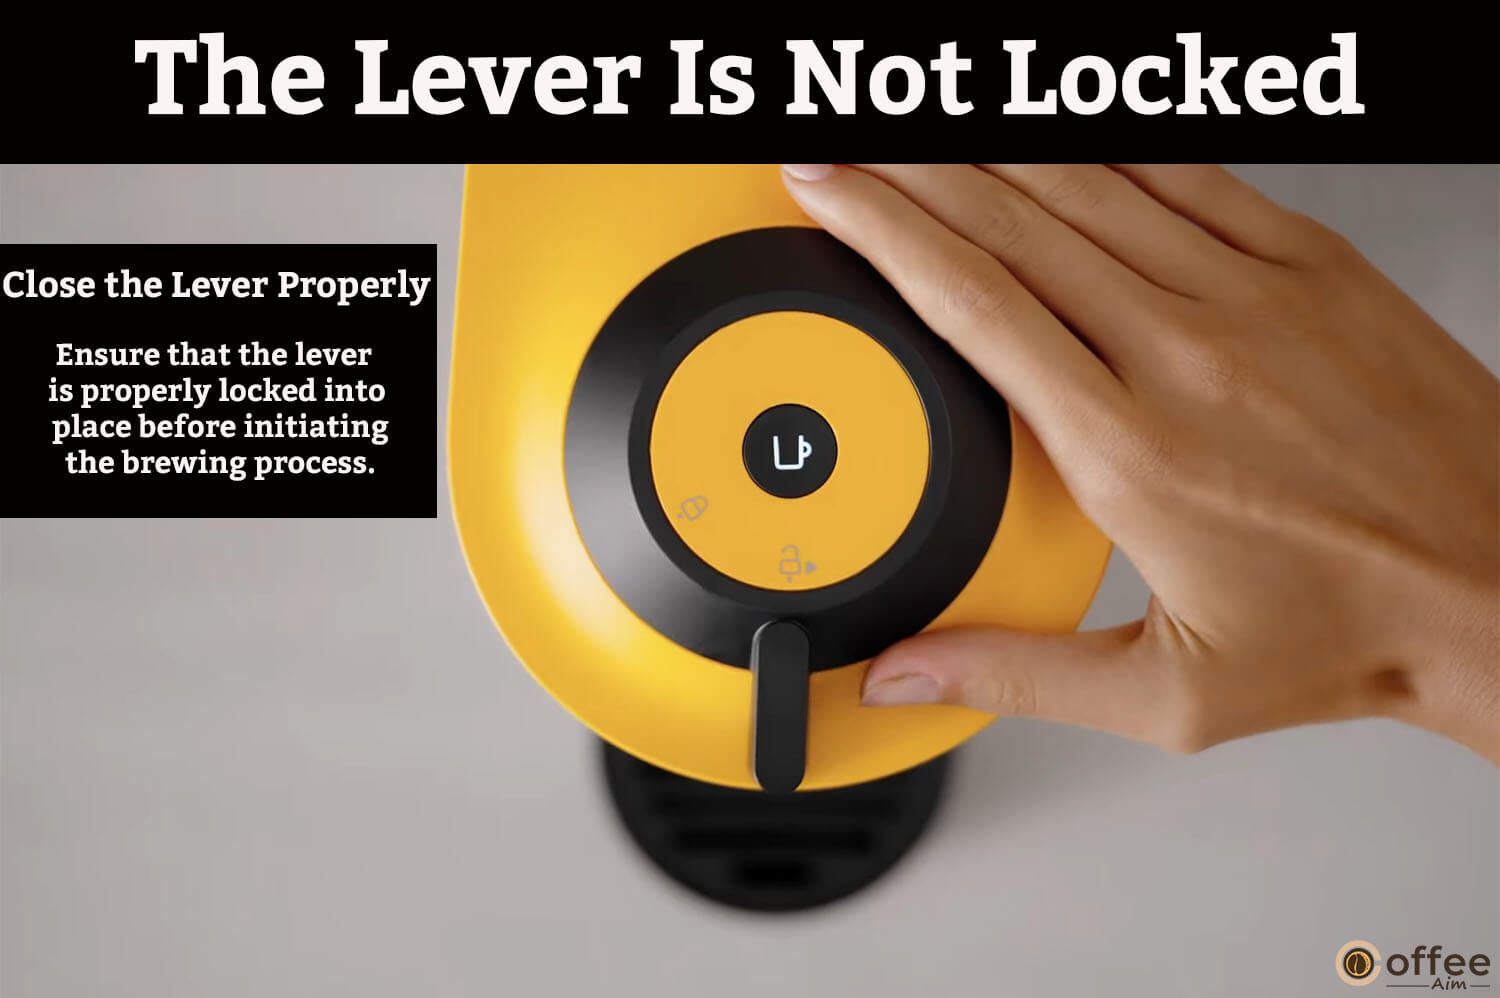 Close the Lever Properly